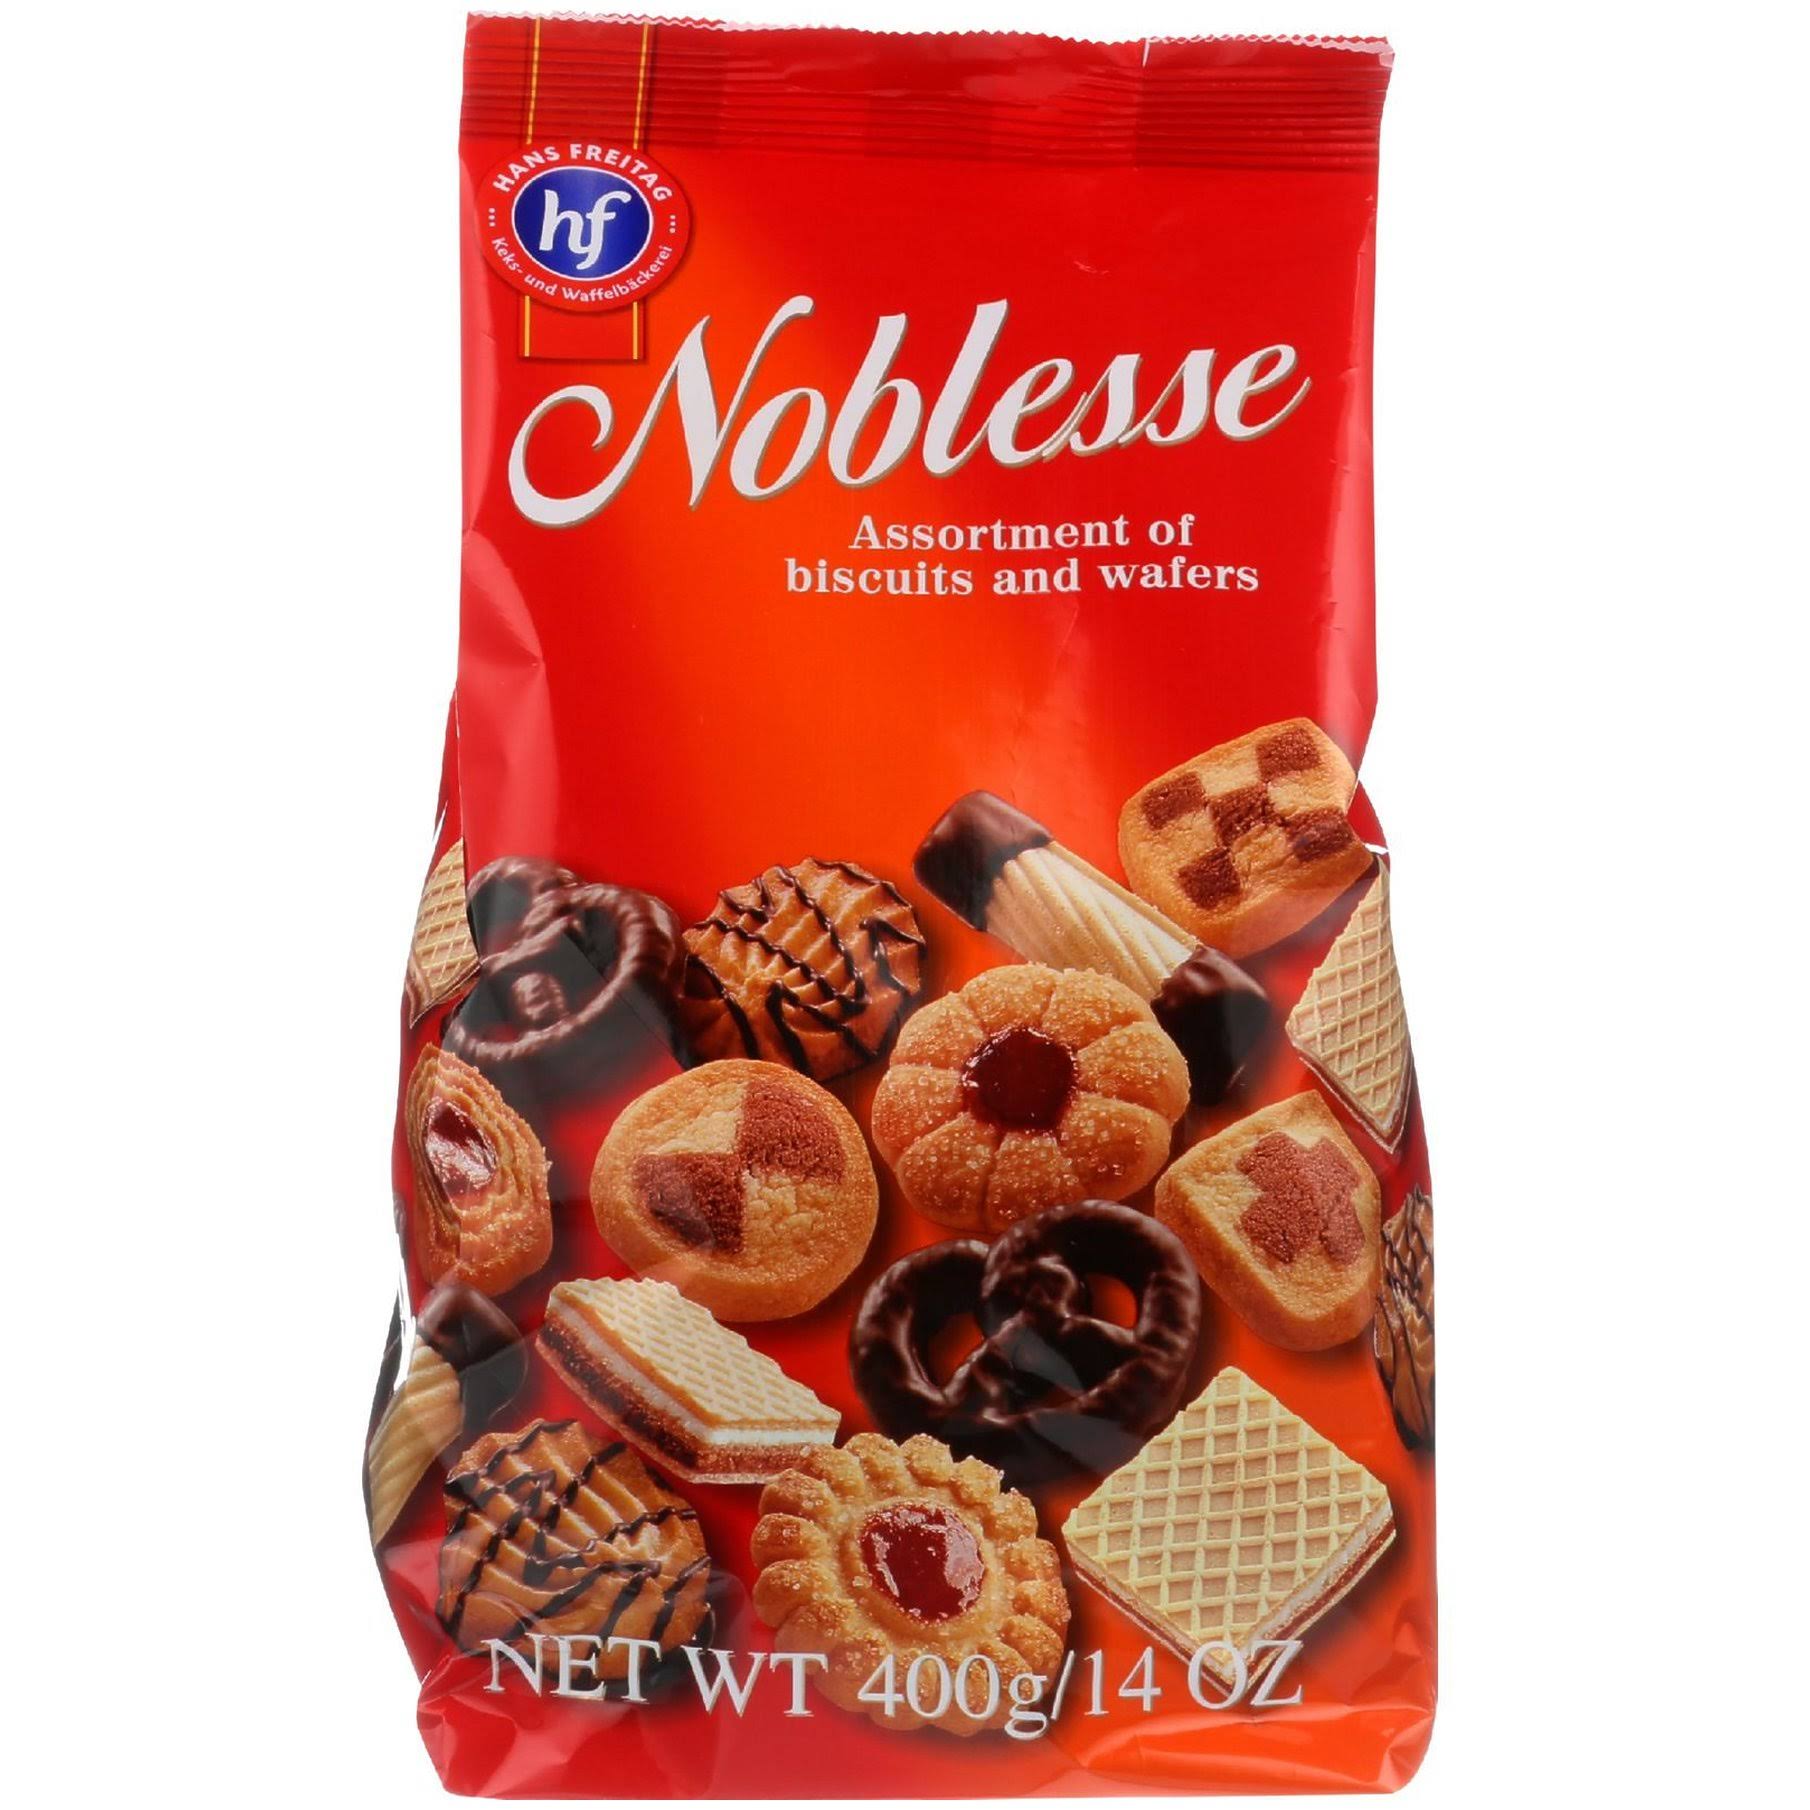 Hans Freitag Noblesse Biscuits and Wafer Assortment - 14oz